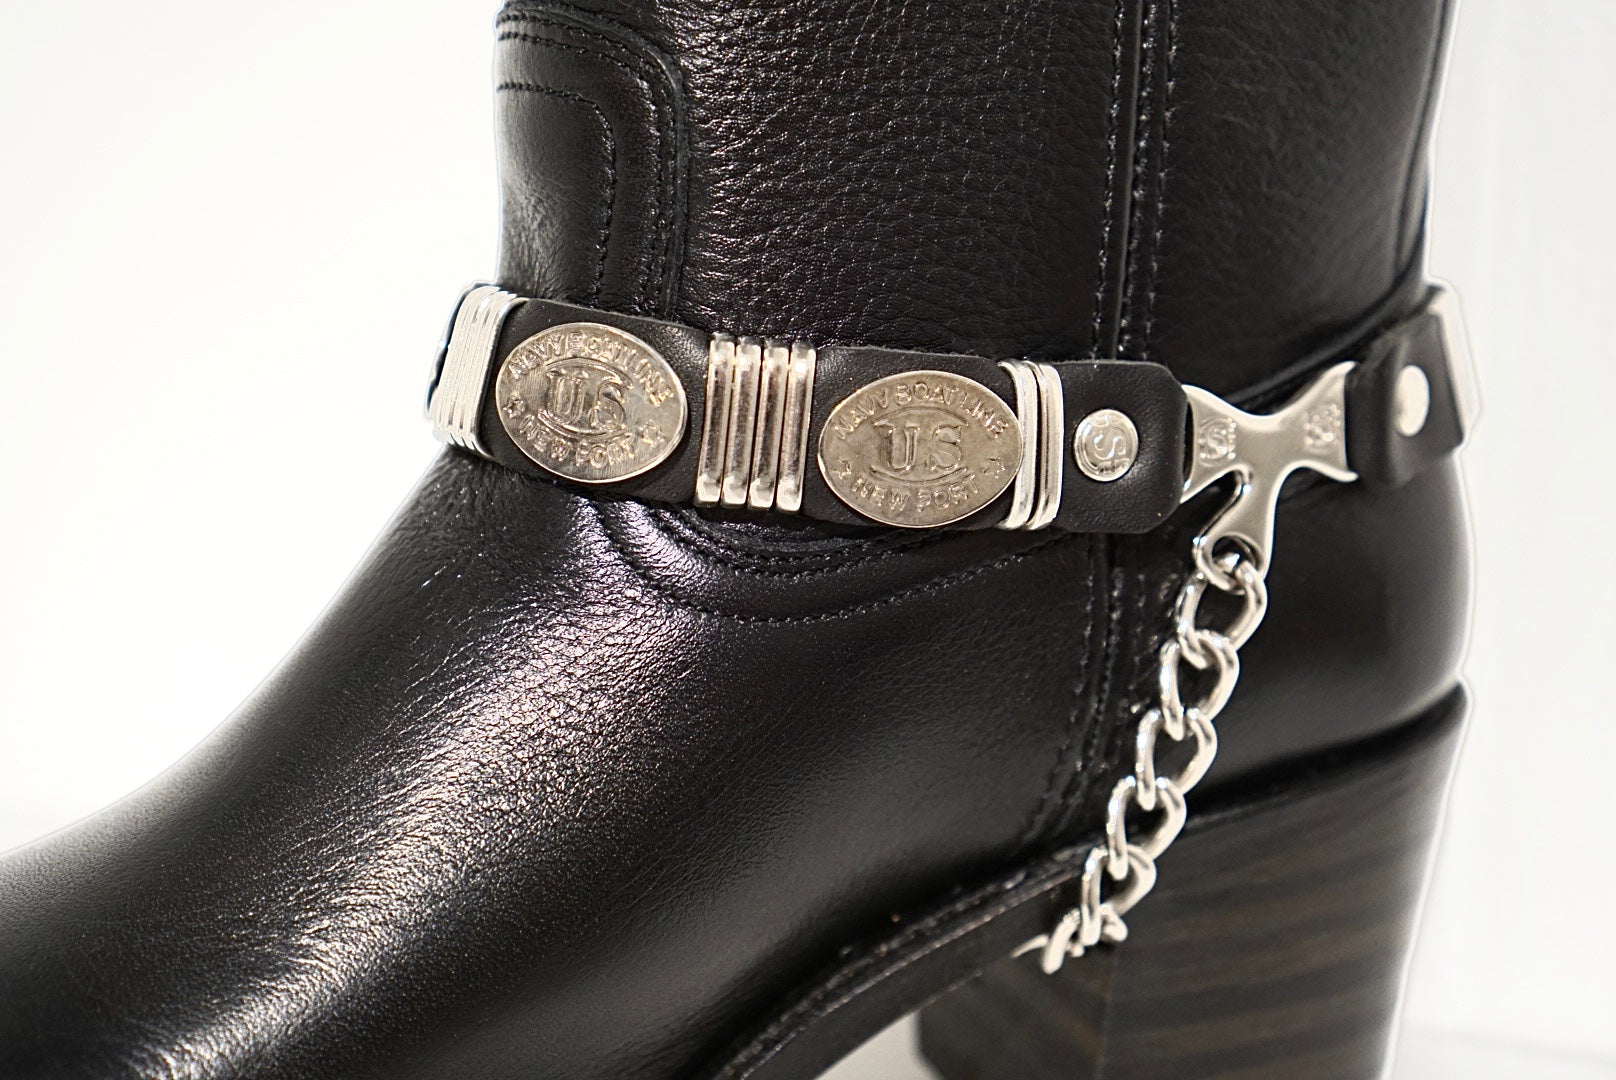 Sendra spurs - black with silver coins